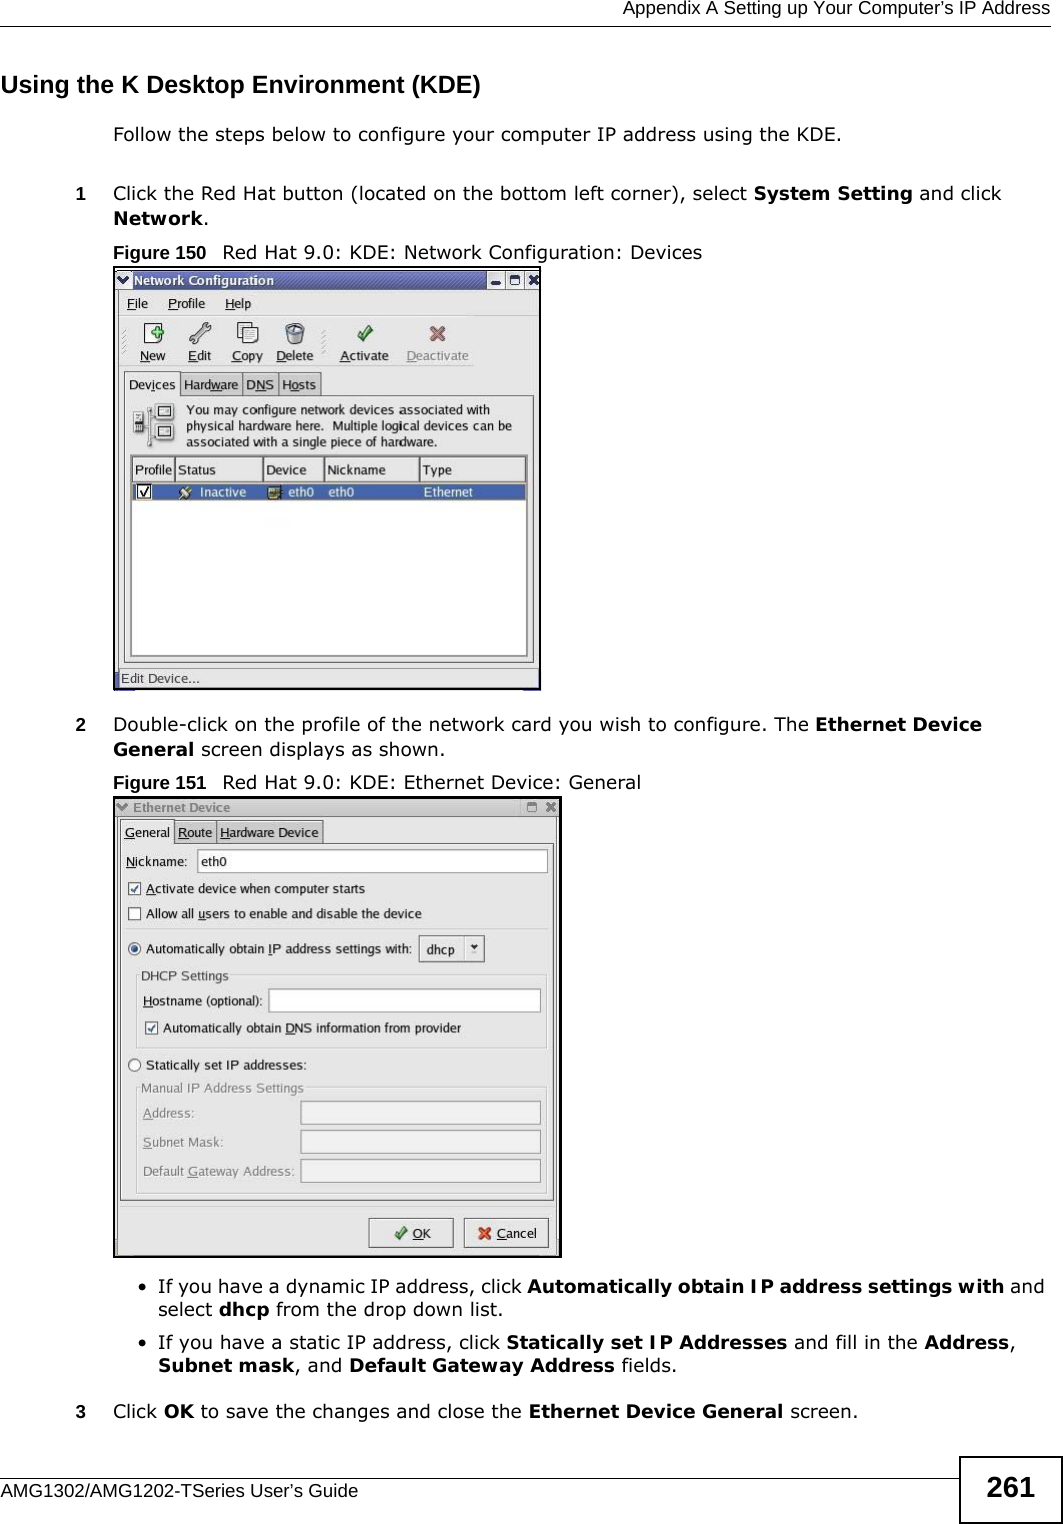  Appendix A Setting up Your Computer’s IP AddressAMG1302/AMG1202-TSeries User’s Guide 261Using the K Desktop Environment (KDE)Follow the steps below to configure your computer IP address using the KDE. 1Click the Red Hat button (located on the bottom left corner), select System Setting and click Network.Figure 150   Red Hat 9.0: KDE: Network Configuration: Devices 2Double-click on the profile of the network card you wish to configure. The Ethernet Device General screen displays as shown. Figure 151   Red Hat 9.0: KDE: Ethernet Device: General  • If you have a dynamic IP address, click Automatically obtain IP address settings with and select dhcp from the drop down list. • If you have a static IP address, click Statically set IP Addresses and fill in the Address, Subnet mask, and Default Gateway Address fields. 3Click OK to save the changes and close the Ethernet Device General screen. 